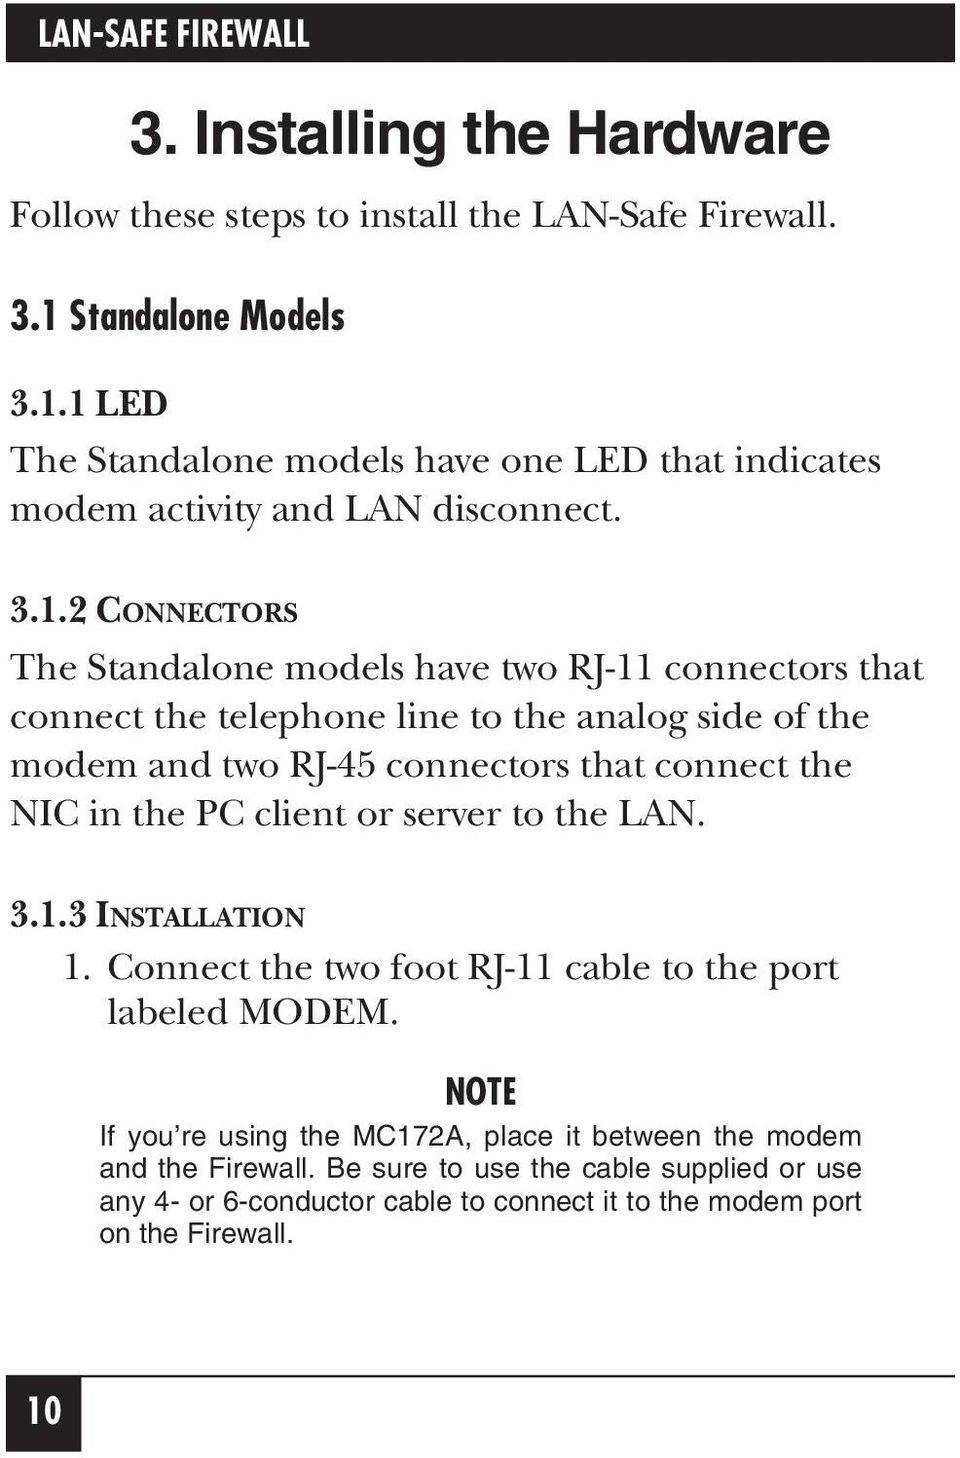 1 LED The Standalone models have one LED that indicates modem activity and LAN disconnect. 3.1.2 CONNECTORS The Standalone models have two RJ-11 connectors that connect the